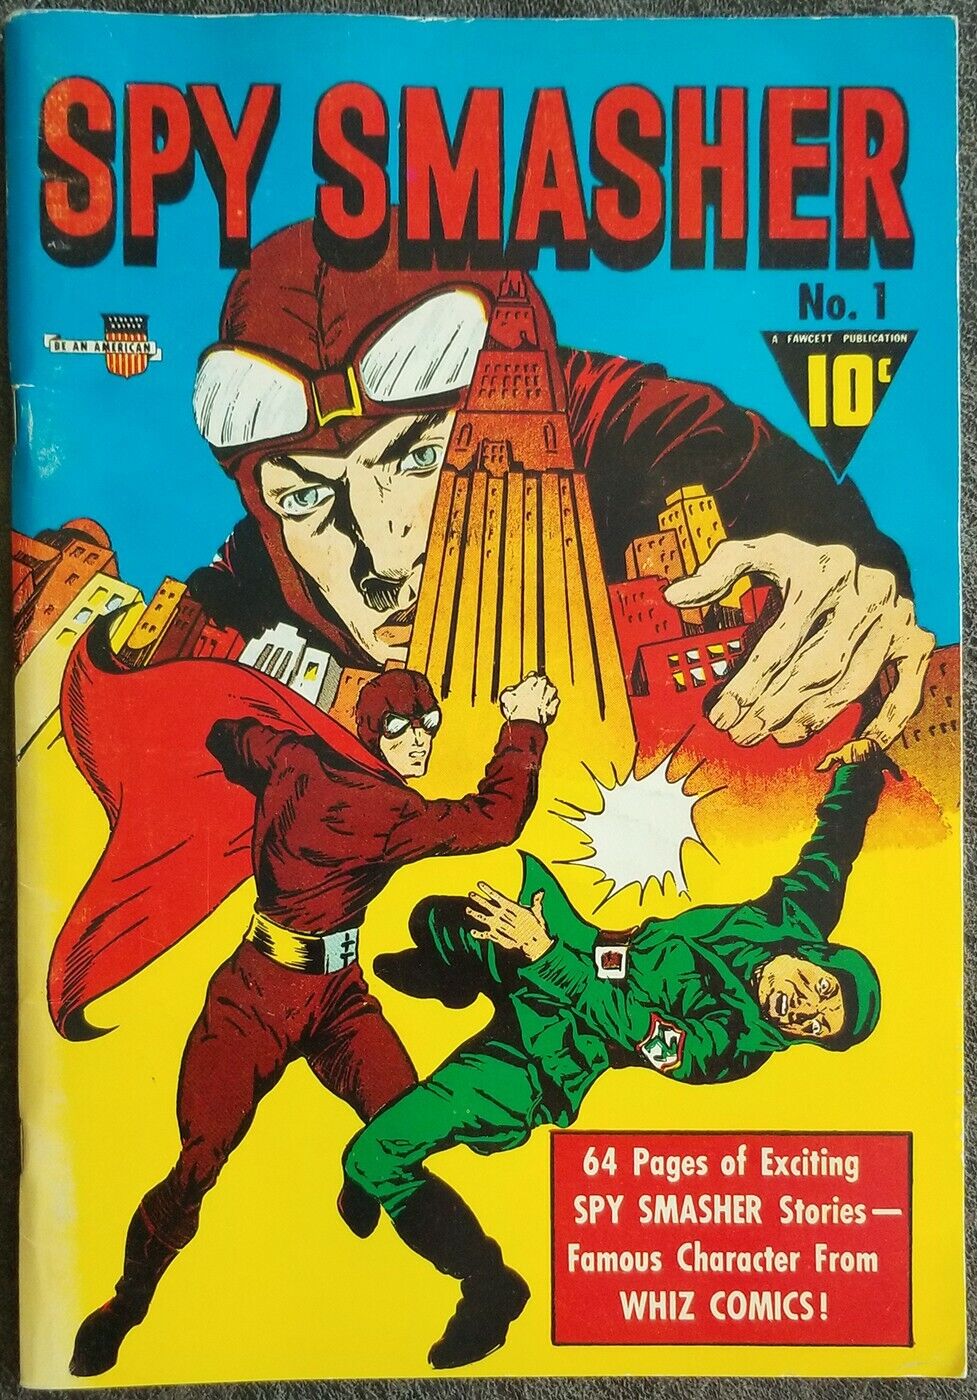 Spy Smasher #1 (1974) Flashback Reprint of 1941 Classic Comic Black/White Pages